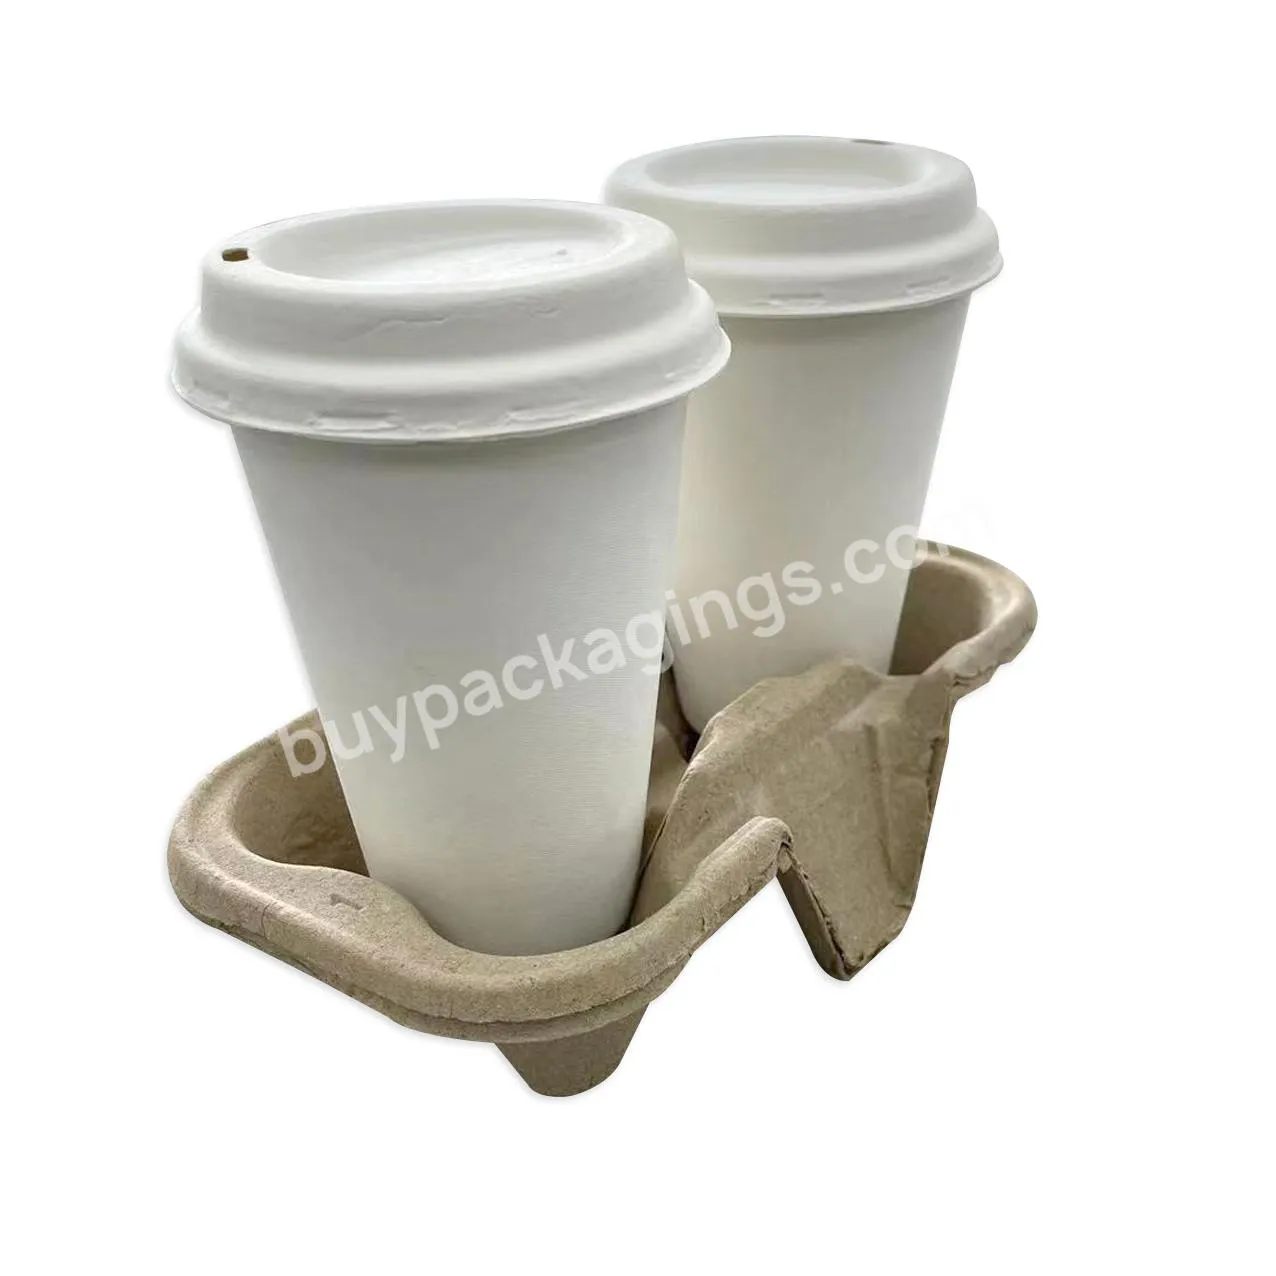 Disposable Biodegradable Takeout Restaurant Supplies Dry Press Two Cup Molded Pulp Coffee Cup Trays - Buy Biodegradable Dry Press Molded Pulp Tray,Disposable Coffee Cup Trays,Takeout Restaurant Supplies Coffee Pulp Tray.